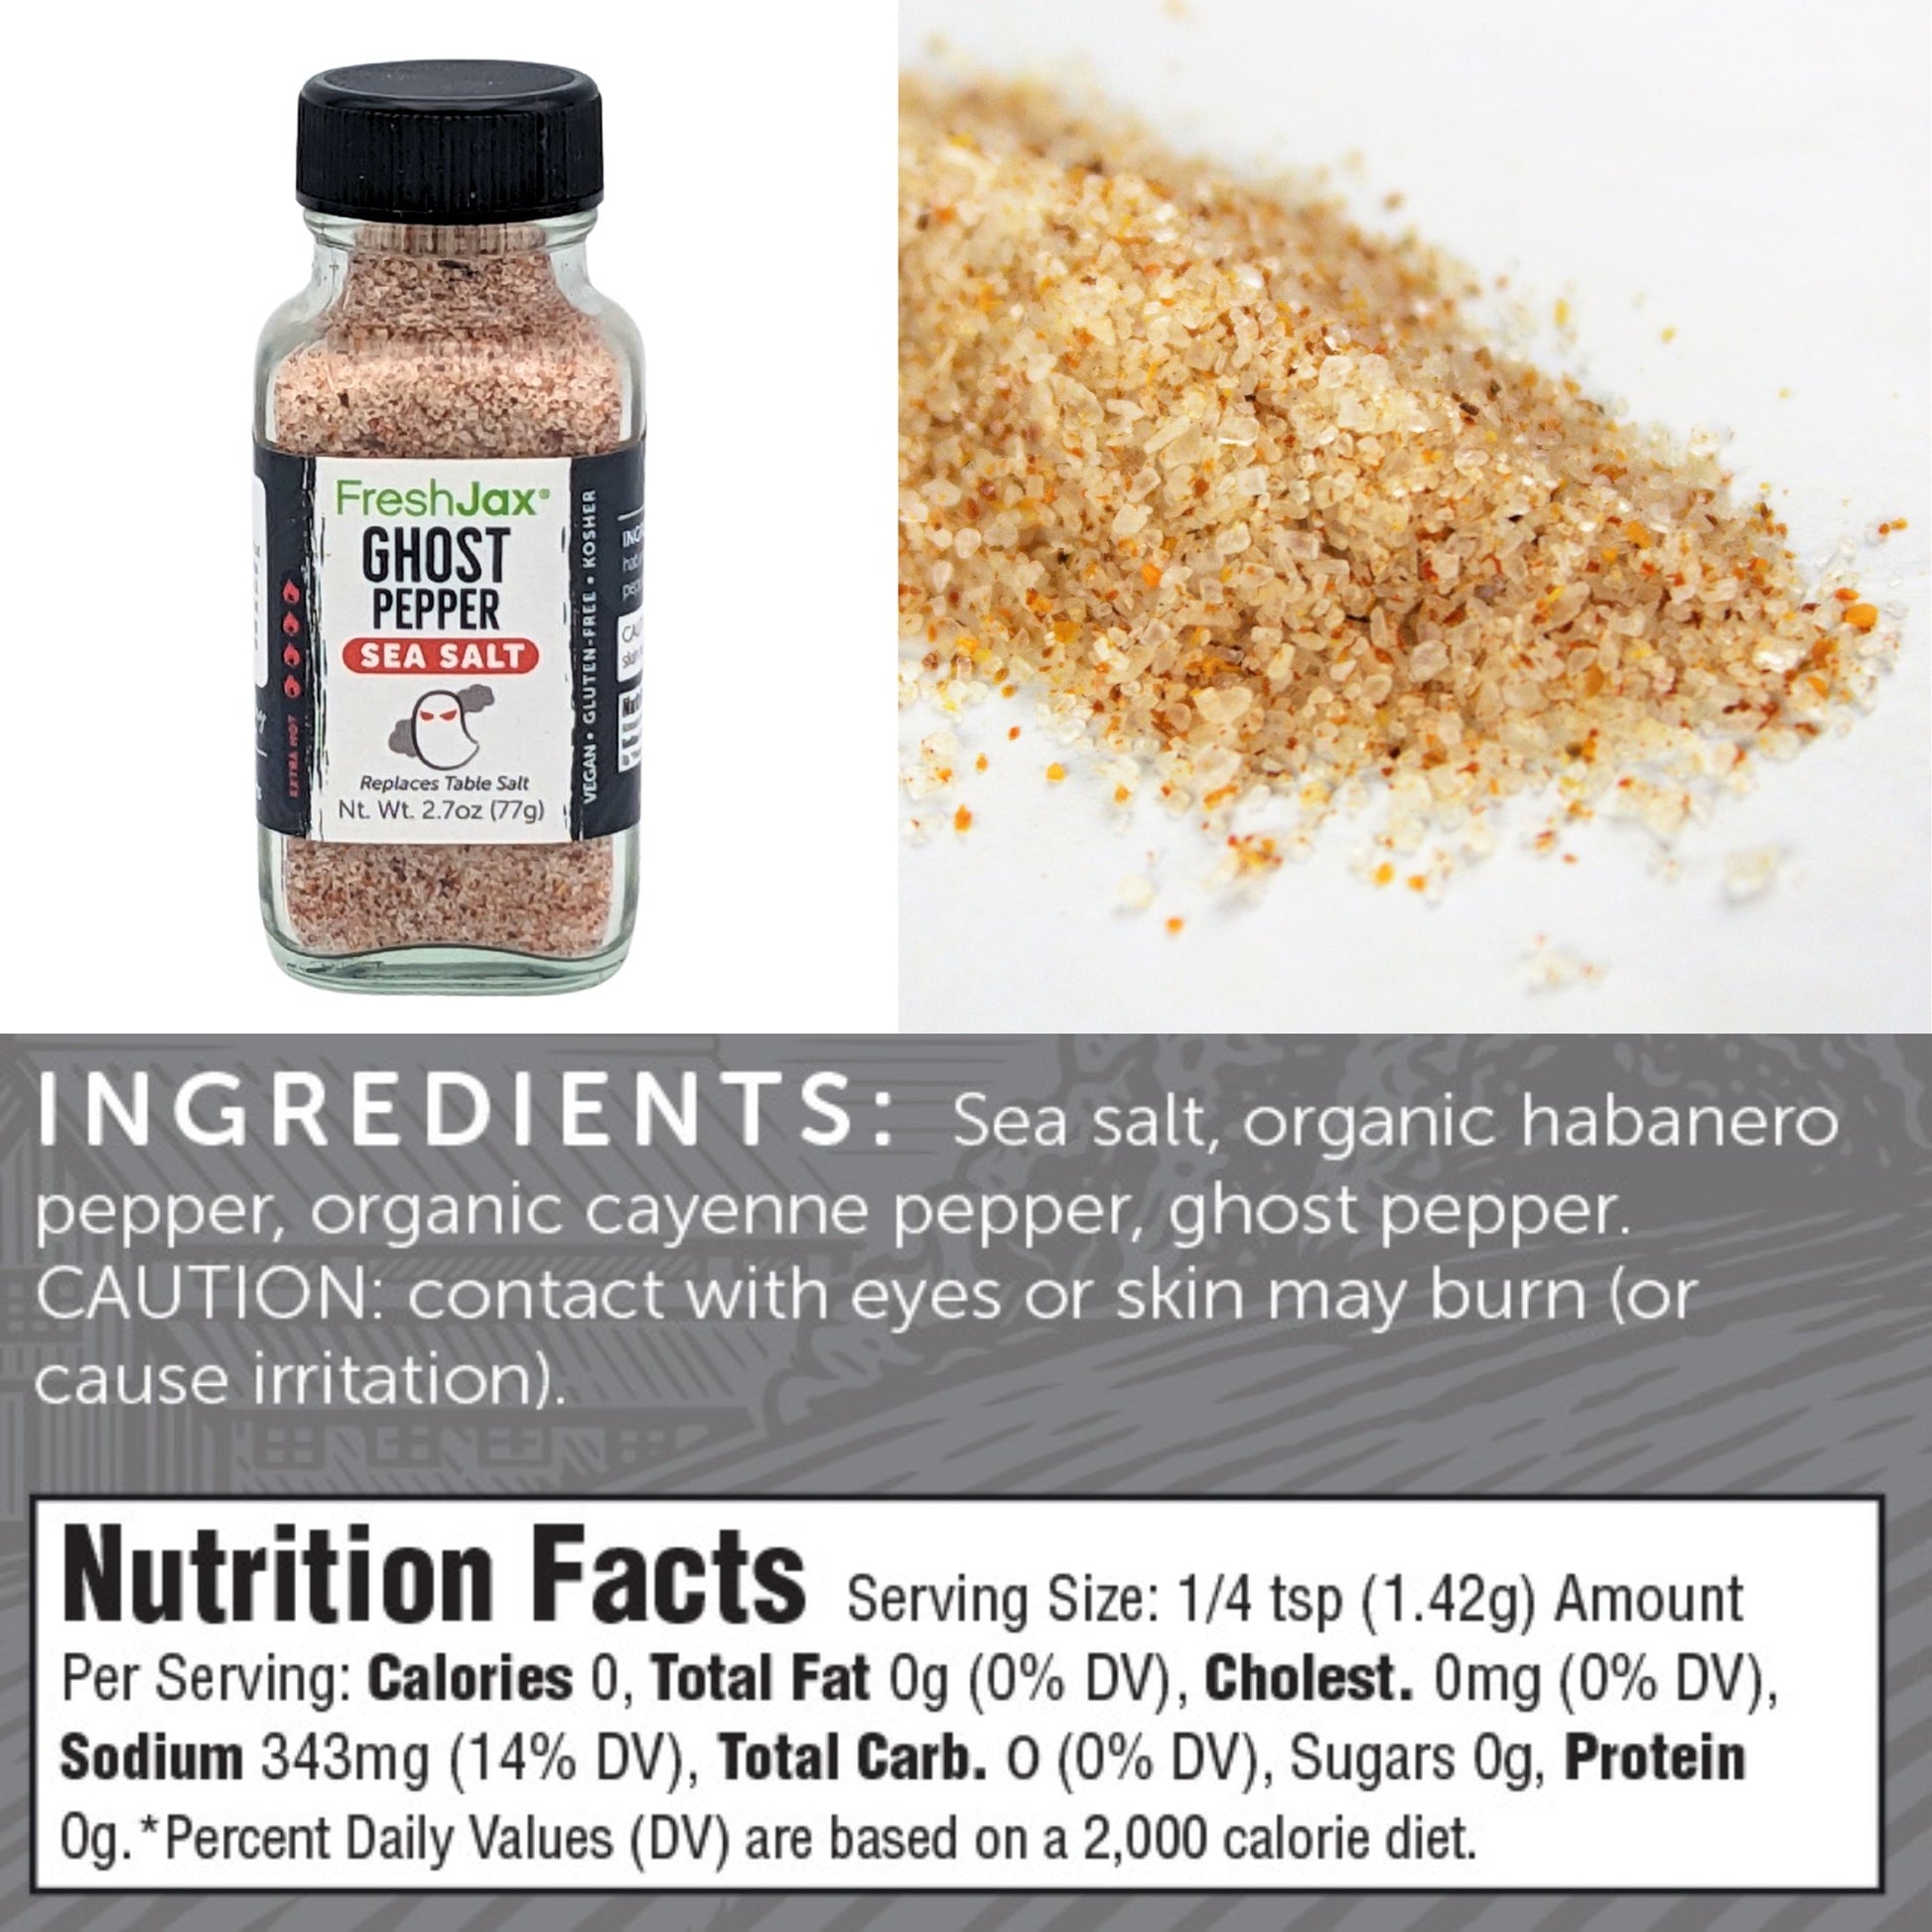 FreshJax Organic Spices Ghost Pepper Sea Salt Ingredients and Nutritional Information